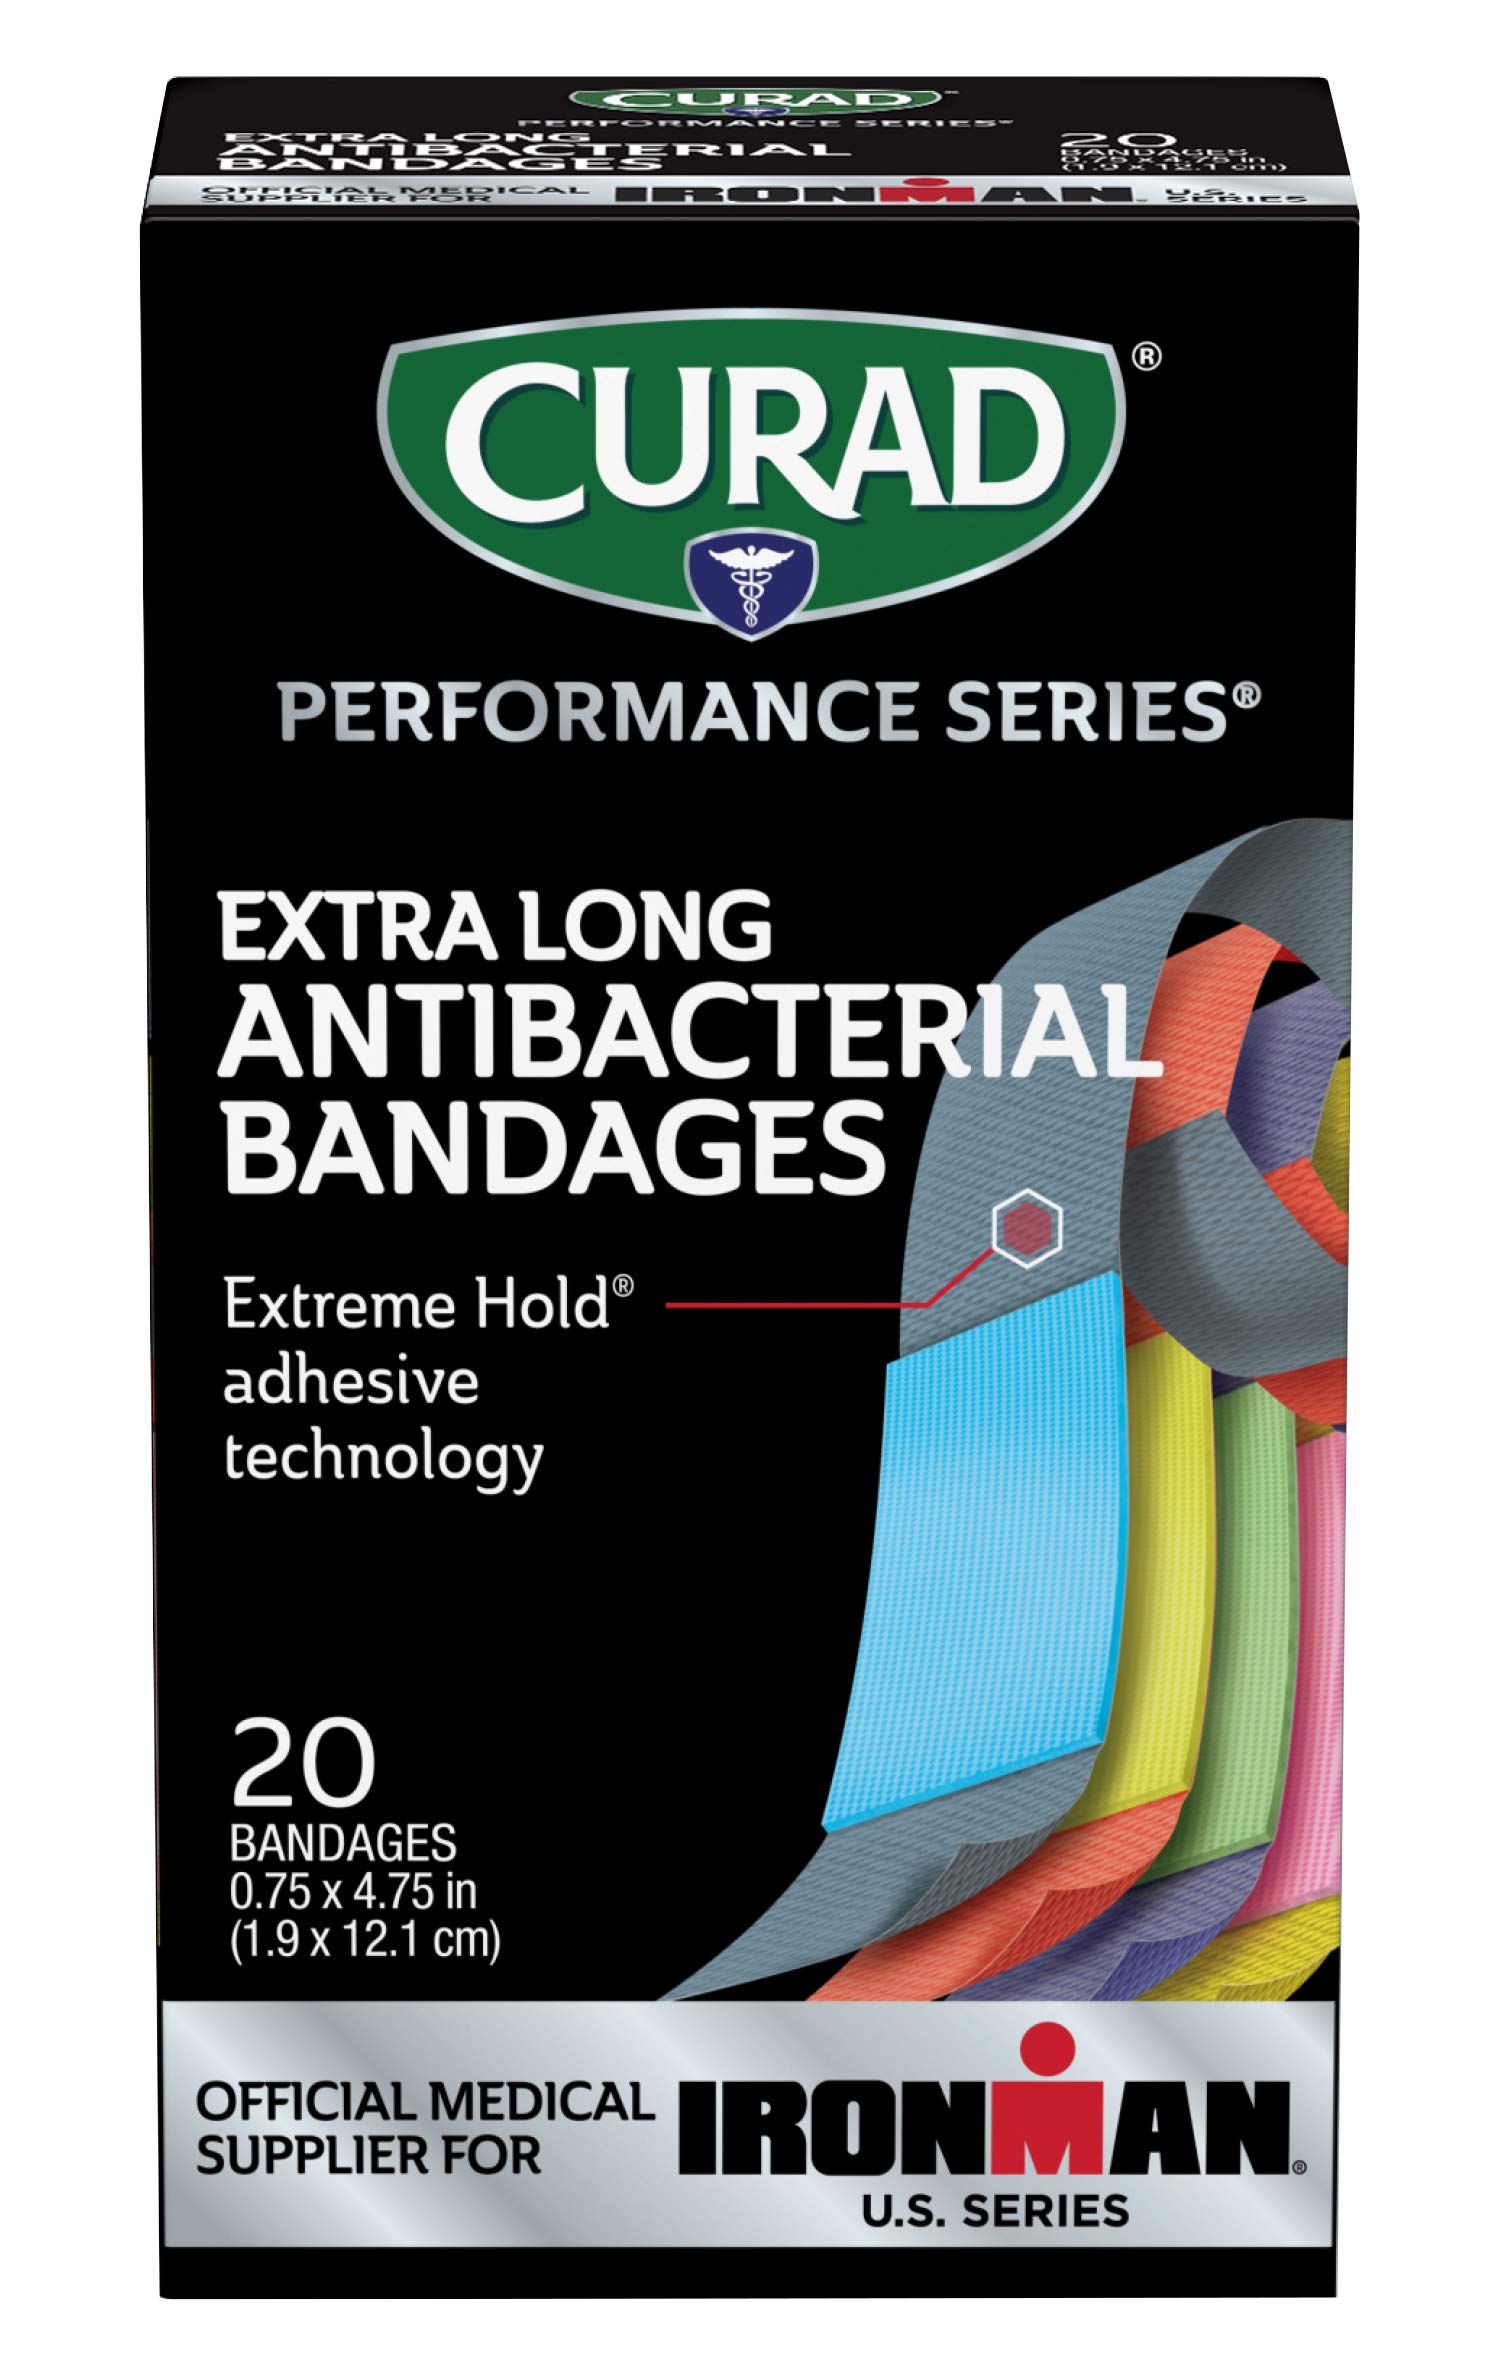 CURAD Performance Series IRONMAN Antibacterial Bandages, Extreme Hold Adhesive Technology, Extra Long Flexible Fabric Bandages for Cuts, Scrapes, & Burns, Assorted Colors, 0.75 x 4.75 inches, 20 Count